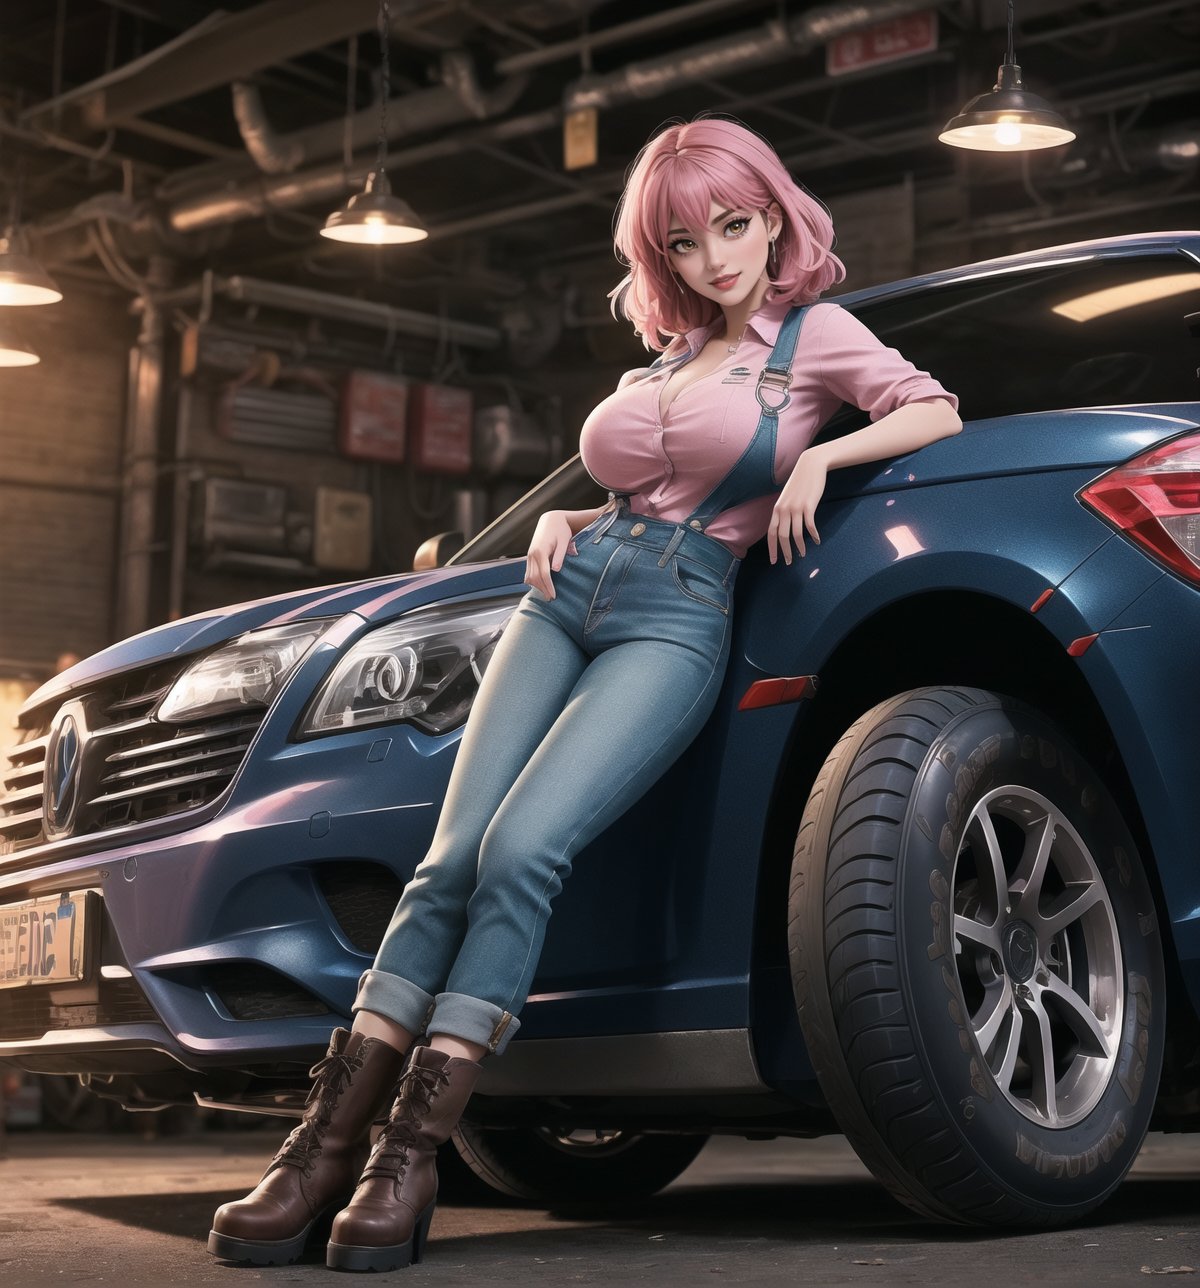 An ultra-detailed 16K masterpiece with a realistic, industrial style, rendered in ultra-high resolution with lifelike detail. | Rina, a 28-year-old woman, is dressed in dark blue mechanic's overalls, with the name "Rina" embroidered on the chest. She also wears ripped jeans, black leather boots, and brown leather gloves. Her short pink hair is tousled in a modern, shaggy cut. Her golden eyes are looking straight at the viewer as she smiles and shows her teeth, wearing bright red lipstick and war paint on her face. It is located in a vehicle repair shop, with machines, tires, metal structures and vehicle engines around it. The light from fluorescent lamps illuminates the place, creating an atmosphere of hard, concentrated work. | The image highlights Rina's sensual figure and the industrial elements of the auto repair shop. Machines, tires, metal structures and vehicle engines create a hard and concentrated work environment. Fluorescent lamps illuminate the scene, creating dramatic shadows and highlighting the details of the scene. | Soft, colorful lighting effects create a realistic, industrial atmosphere, while rough, detailed textures on the metal structures and costume add realism to the image. | A sensual and realistic scene of a woman in an auto repair shop, fusing elements of realistic and industrial art. | (((The image reveals a full-body shot as Rina assumes a sensual pose, engagingly leaning against a structure within the scene in an exciting manner. She takes on a sensual pose as she interacts, boldly leaning on a structure, leaning back and boldly throwing herself onto the structure, reclining back in an exhilarating way.))). | ((((full-body shot)))), ((perfect pose)), ((perfect limbs, perfect fingers, better hands, perfect hands, hands))++, ((perfect legs, perfect feet))++, ((huge breasts)), ((perfect design)), ((perfect composition)), ((very detailed scene, very detailed background, perfect layout, correct imperfections)), Enhance++, Ultra details++, More Detail++